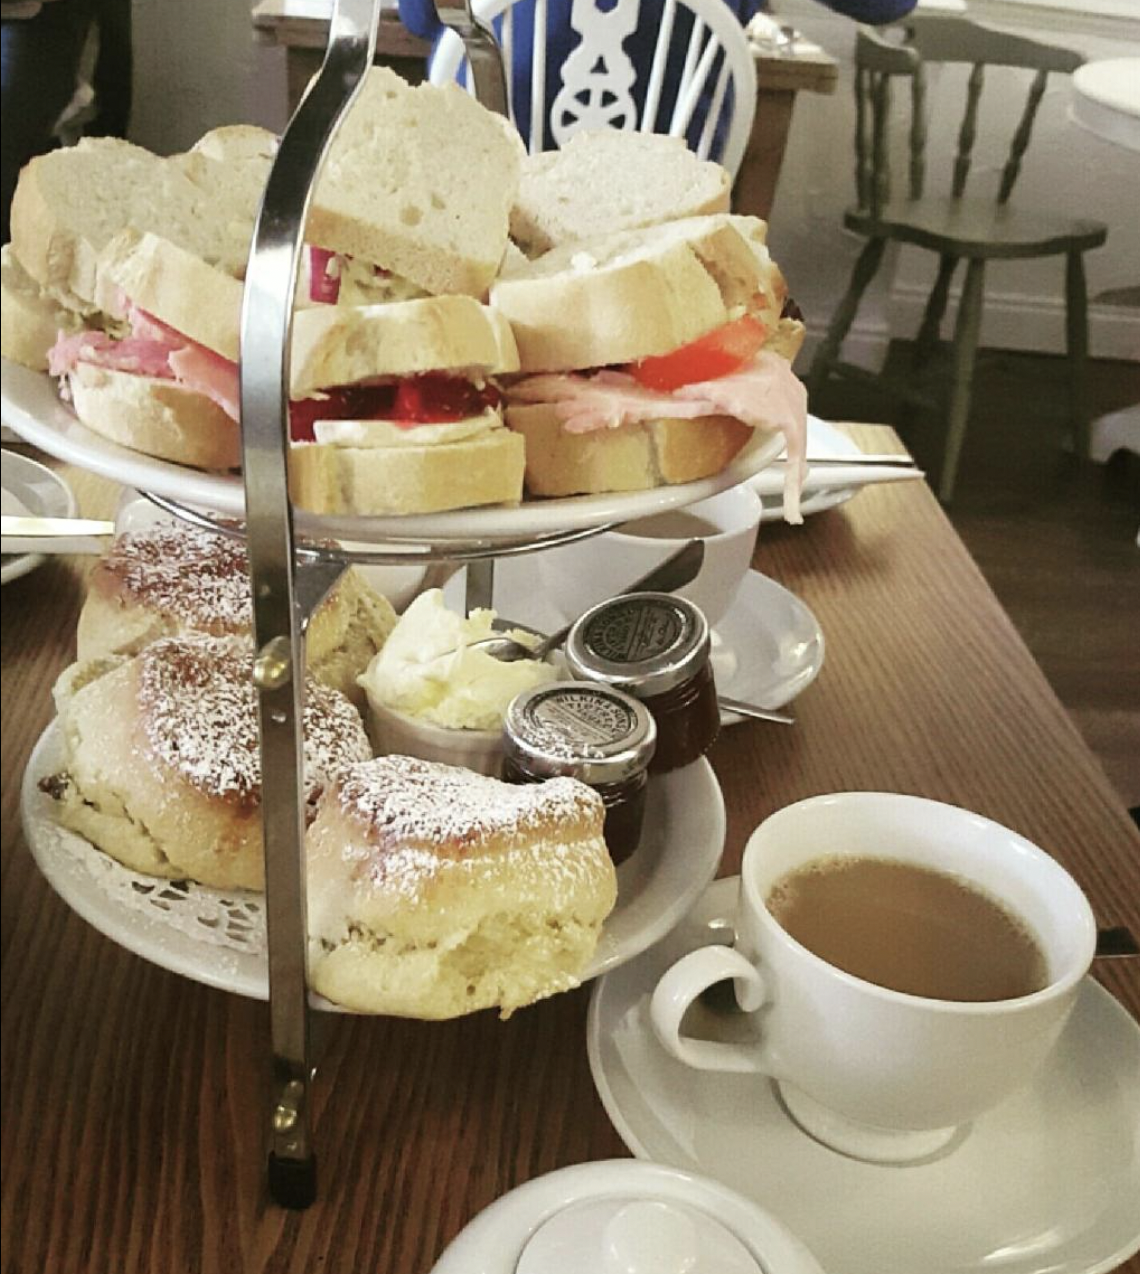 Afternoon tea in the Cotswolds